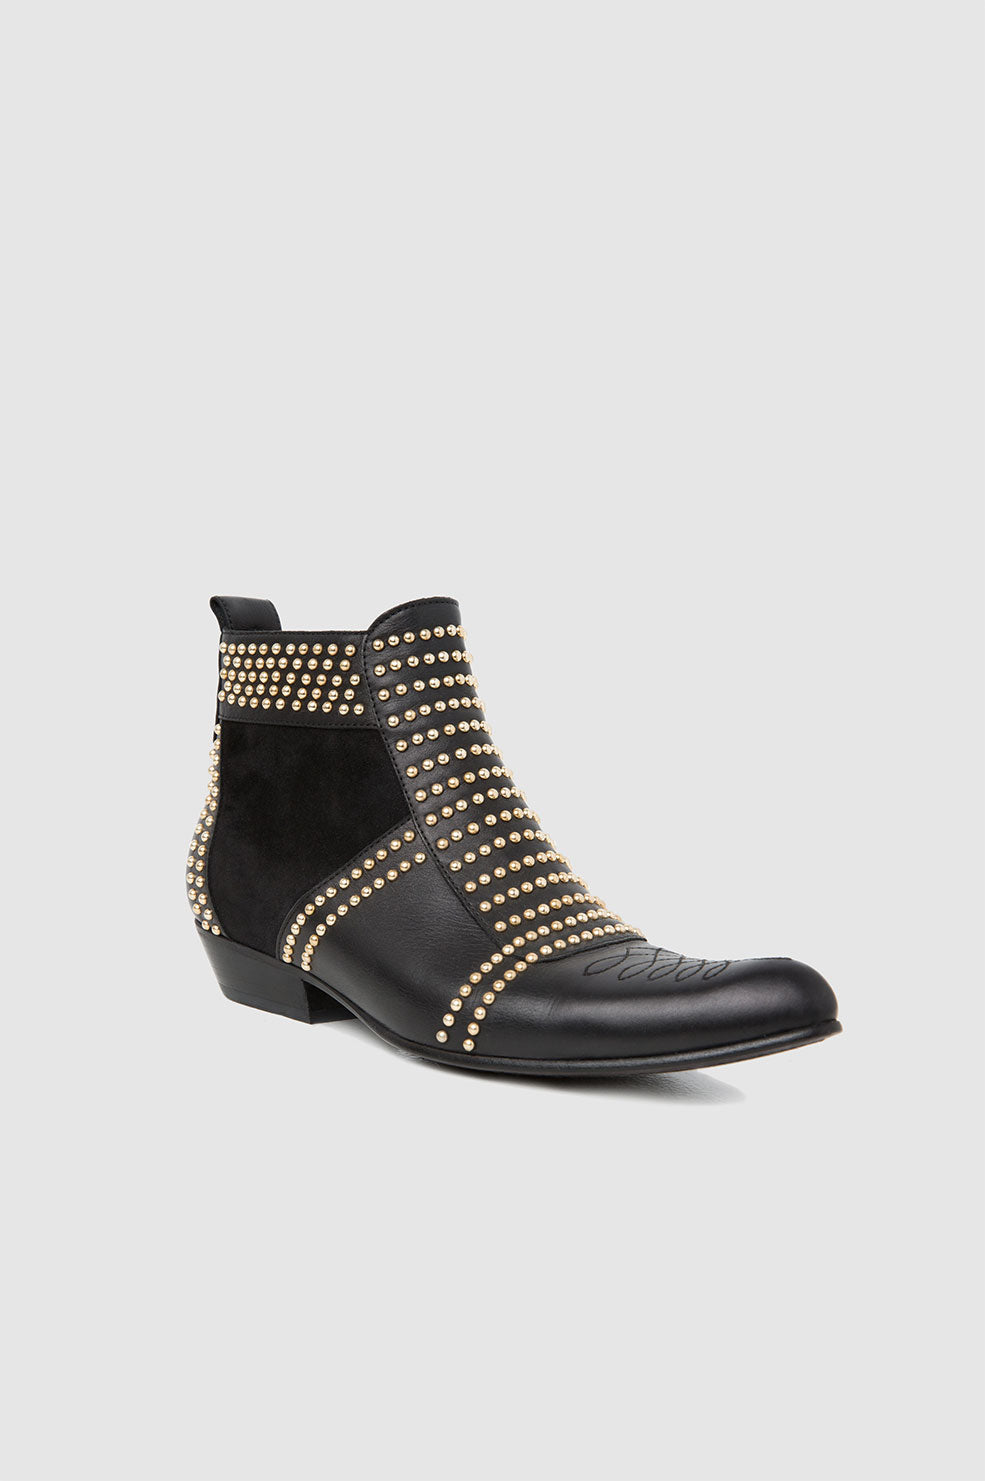 Anine Bing | Charlie Boots - Gold Studs